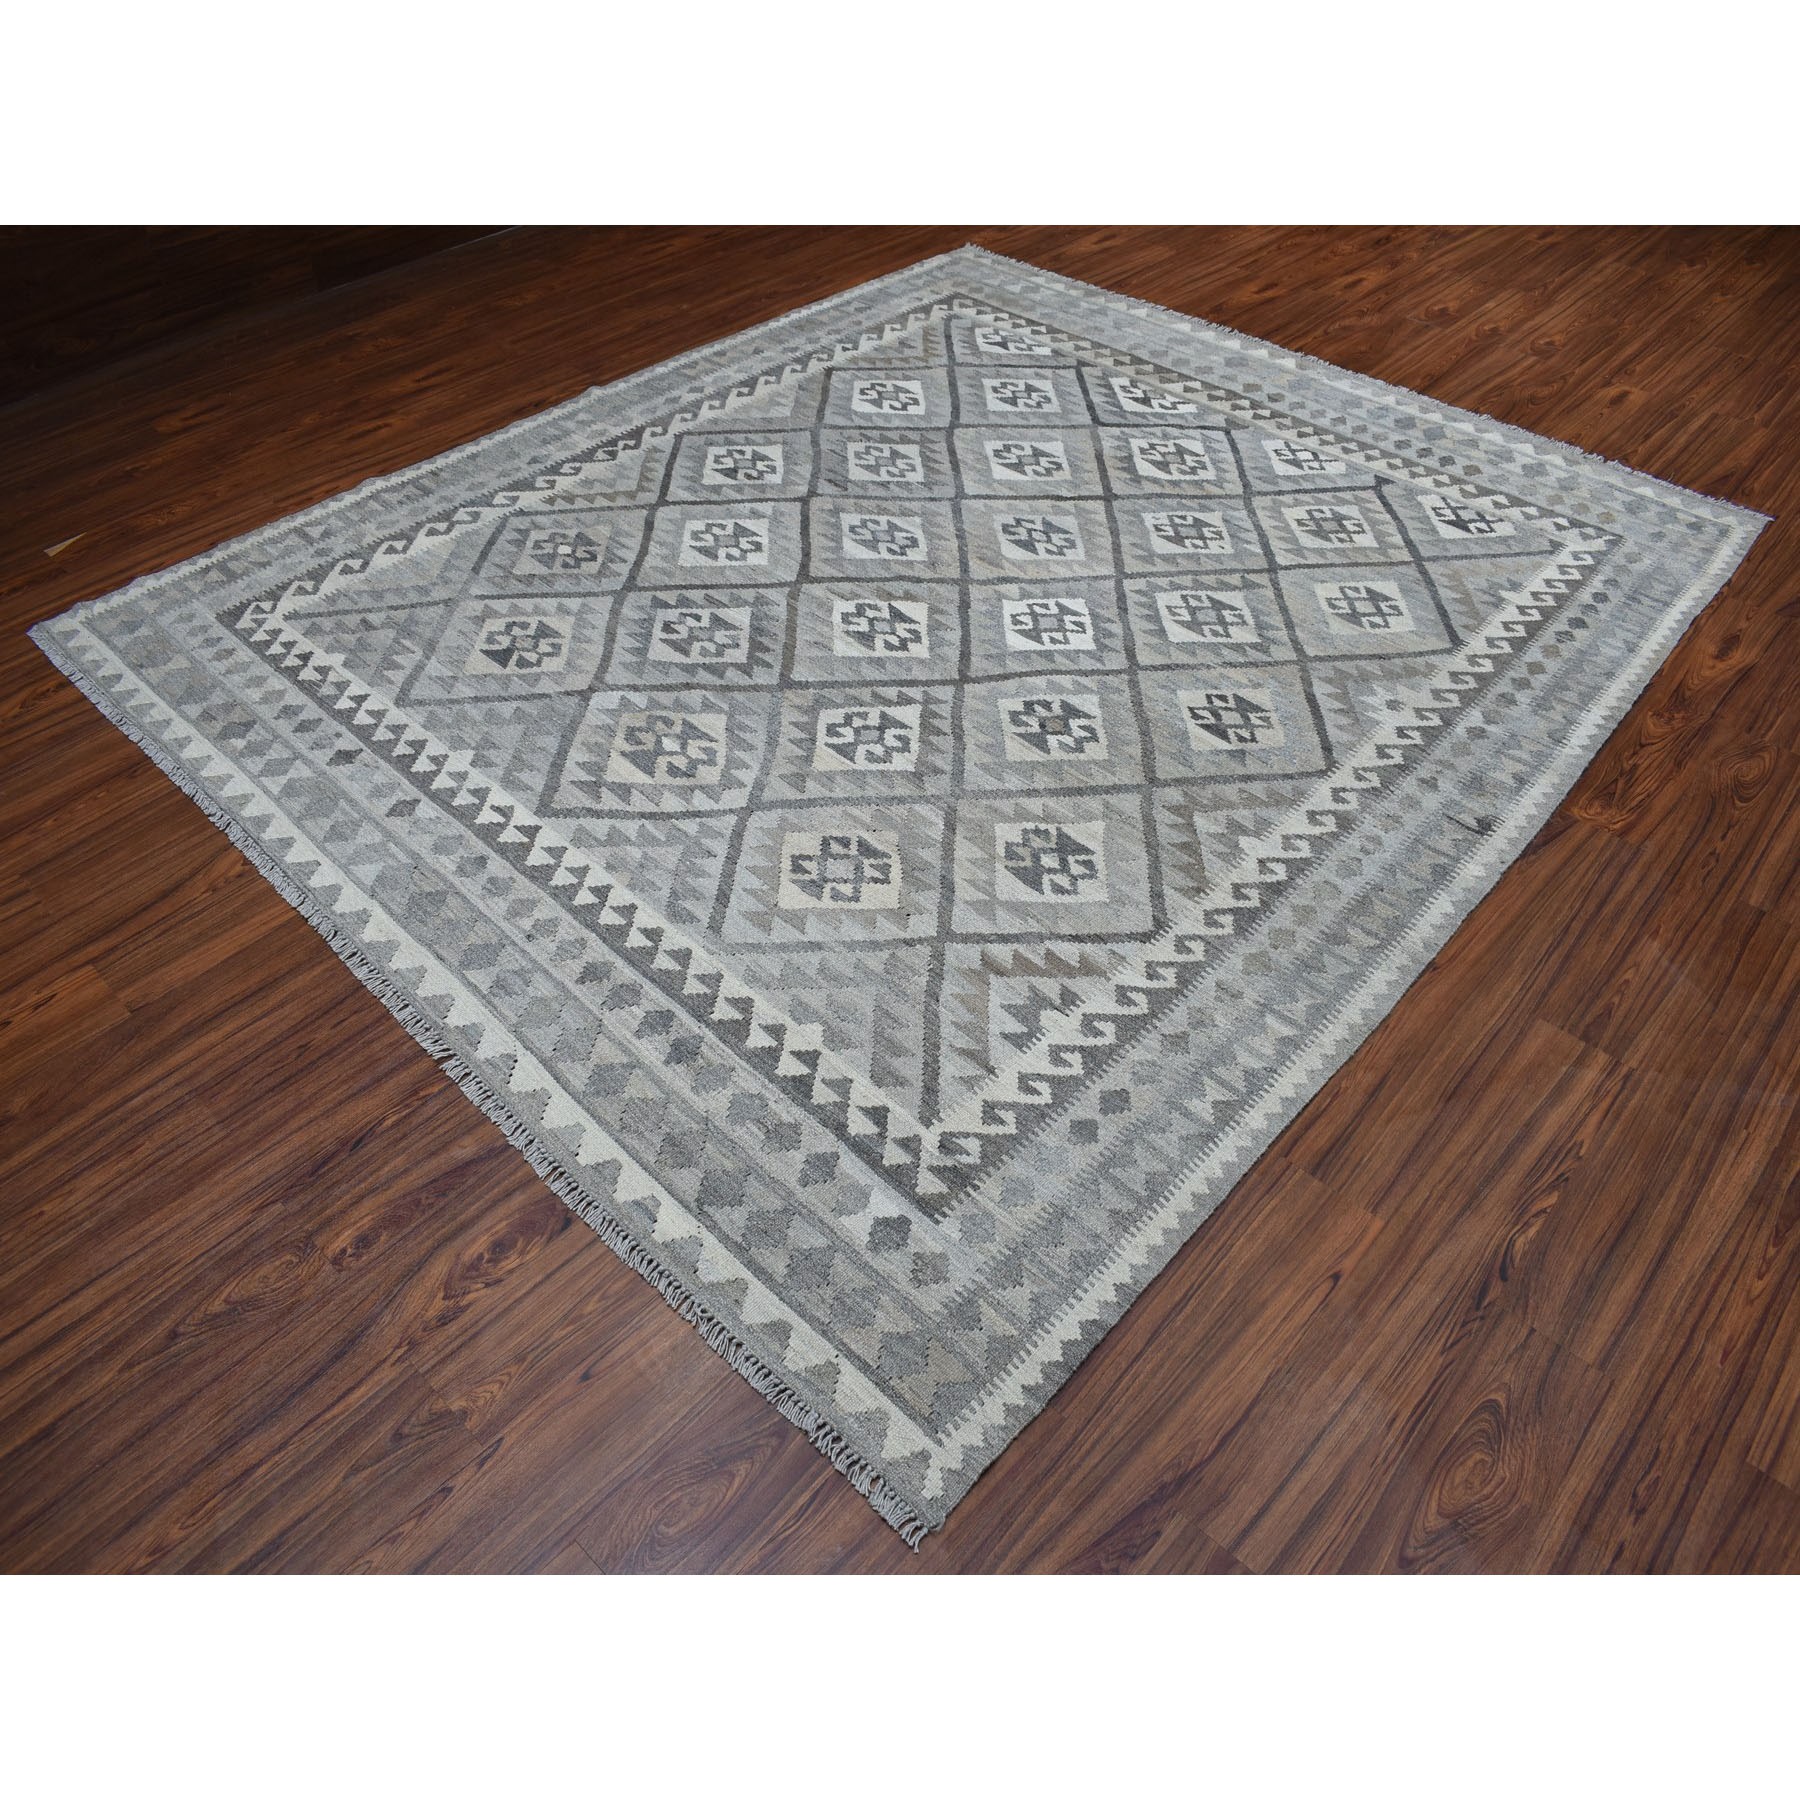 8-4 x9-5  Undyed Natural Wool Afghan Kilim Reversible Hand Woven Oriental Rug 